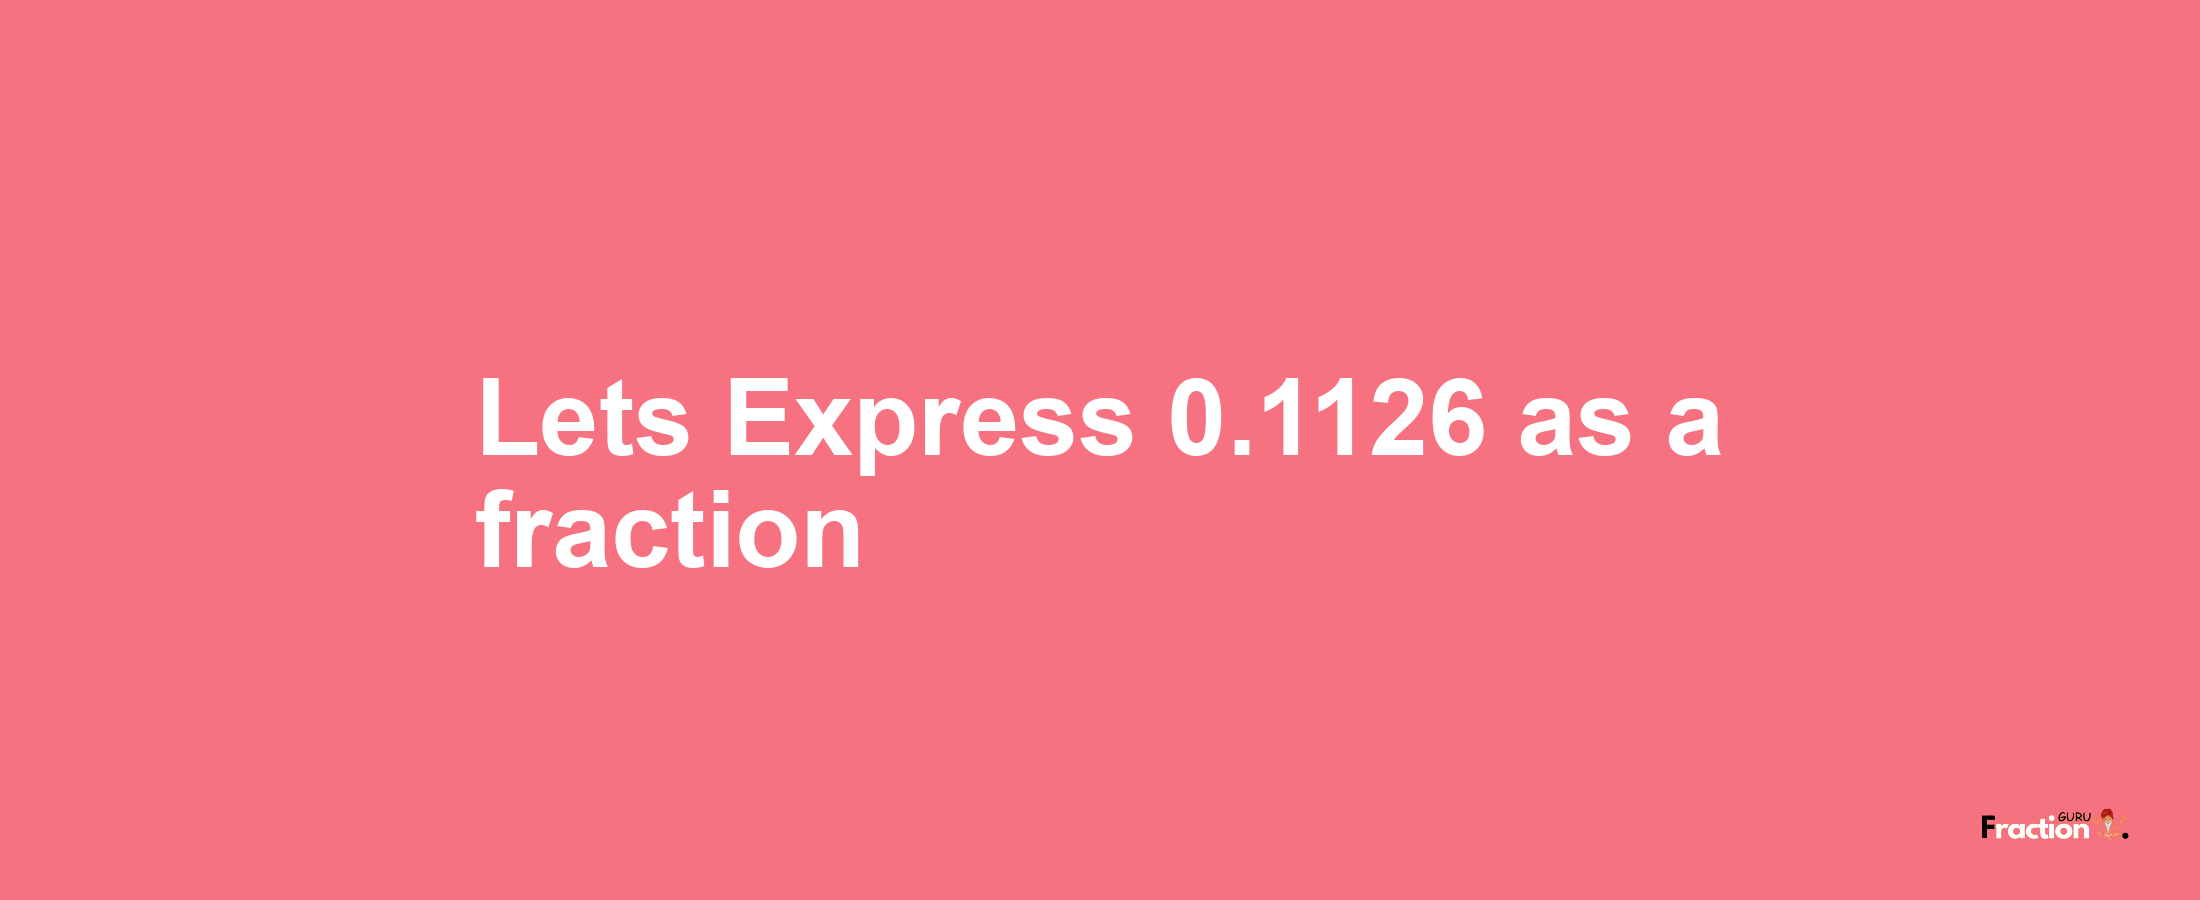 Lets Express 0.1126 as afraction